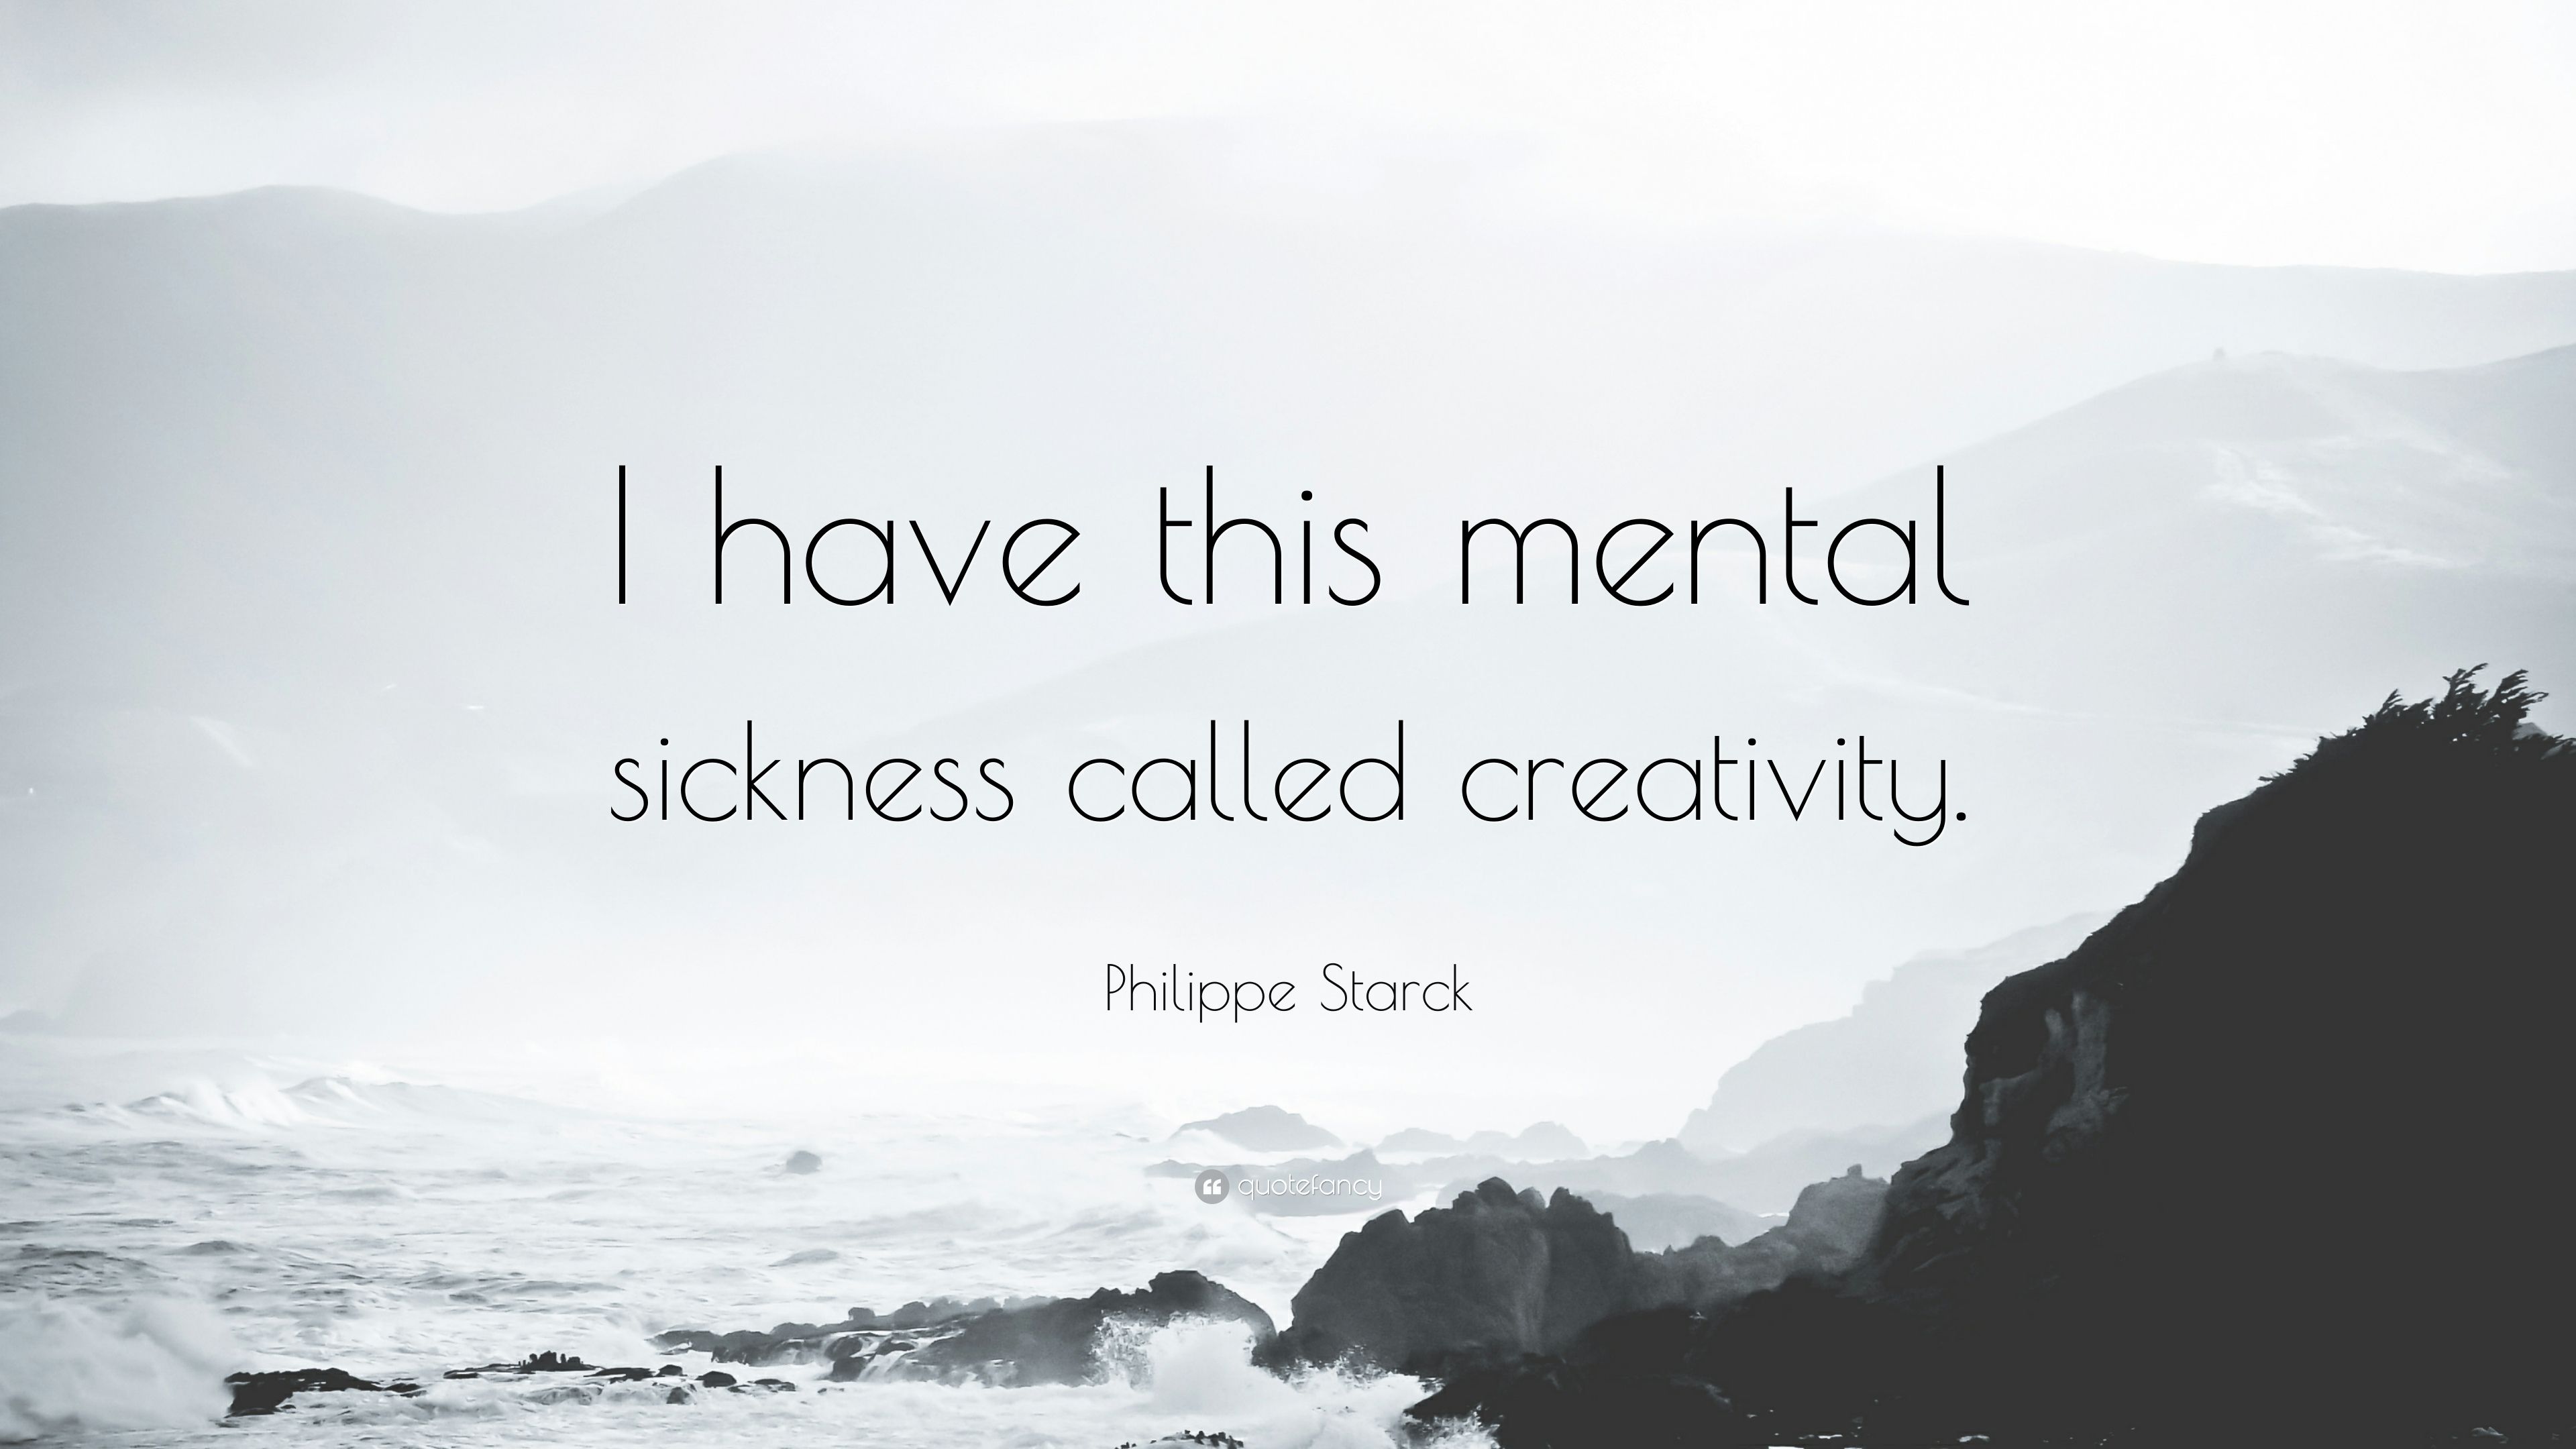 Philippe Starck Quote: “I have this mental sickness called creativity.” (12 wallpaper)